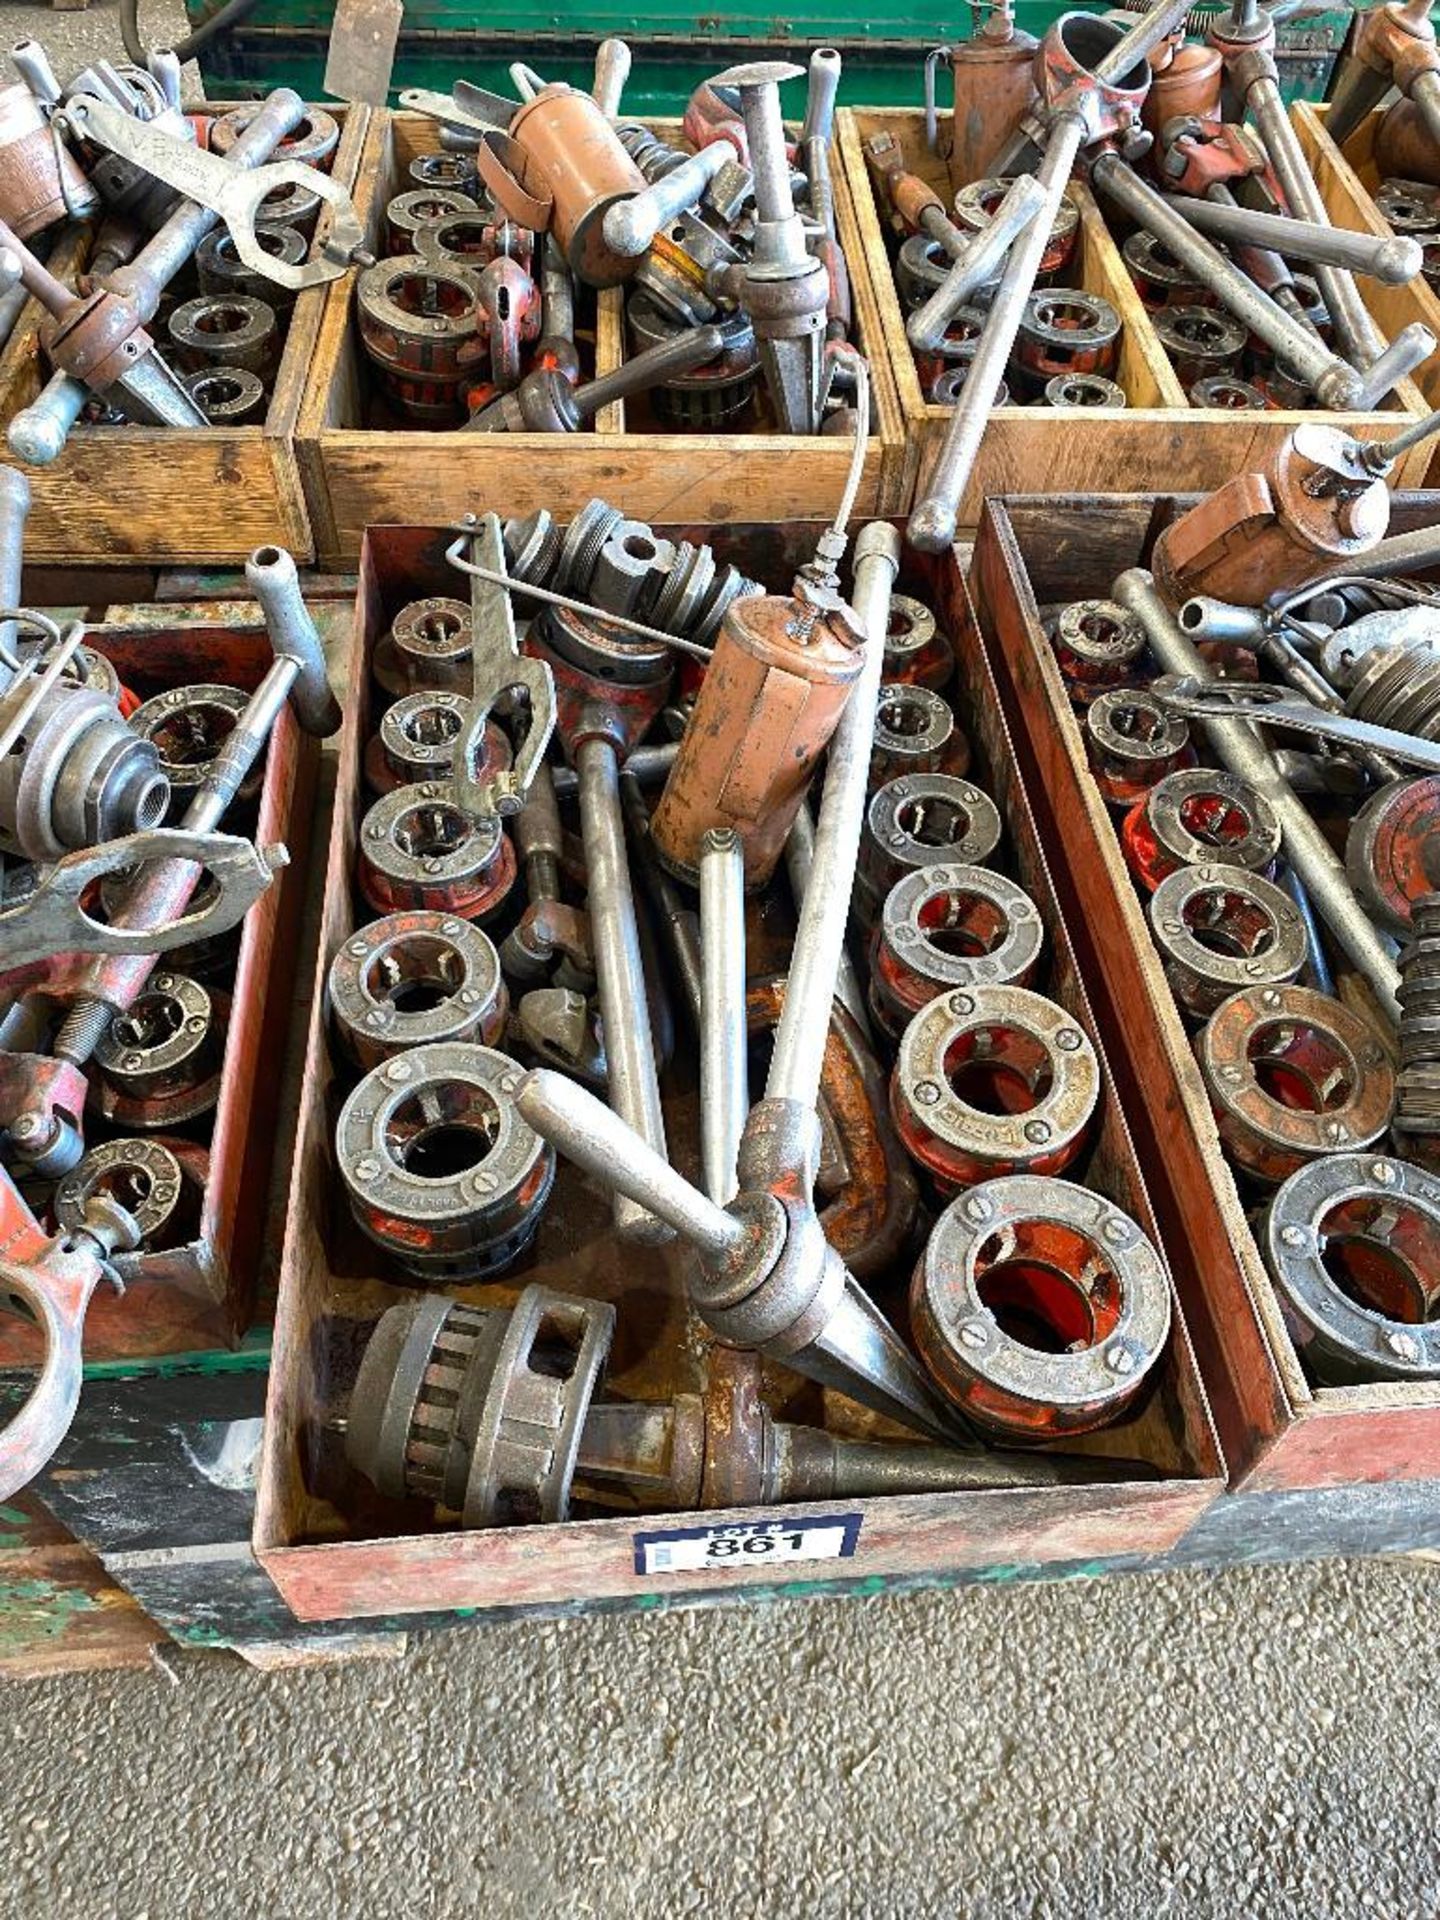 Lot of (2) Asst. Ridgid Manual Threaders Sets including Asst. Die Heads, Pipe Cutters, Reamers, Oil